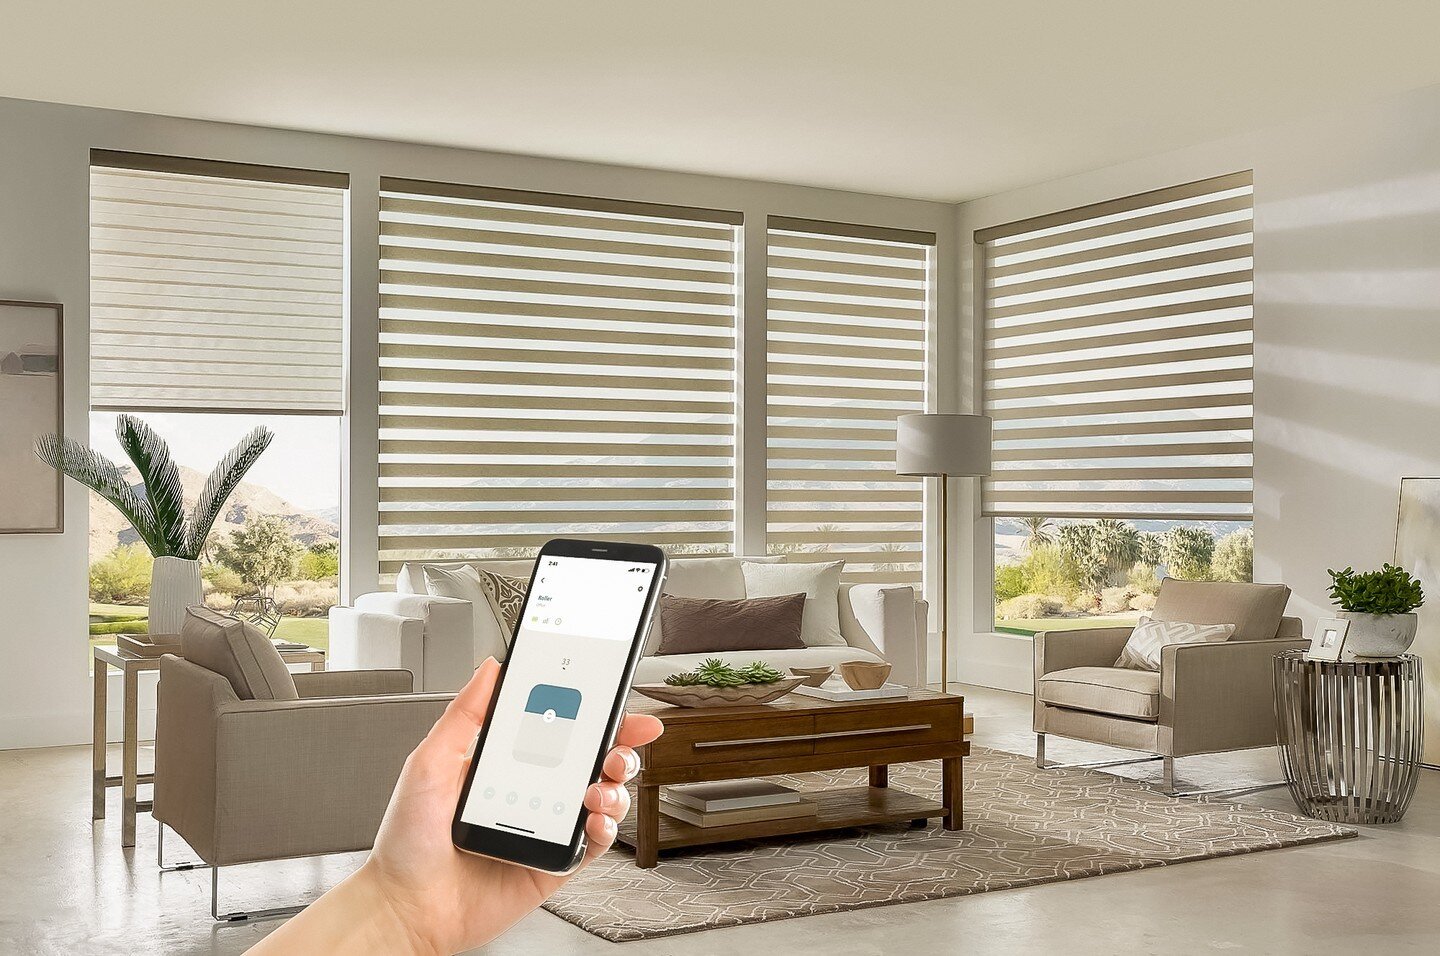 Interested in automatic shades? They can be hardwired in or wireless, allowing you to choose what fits your budget and home best. Have you ever experienced the simplicity of automatic shades?

#shadesshuttersandmore #rollershades #woodshutters #woodb